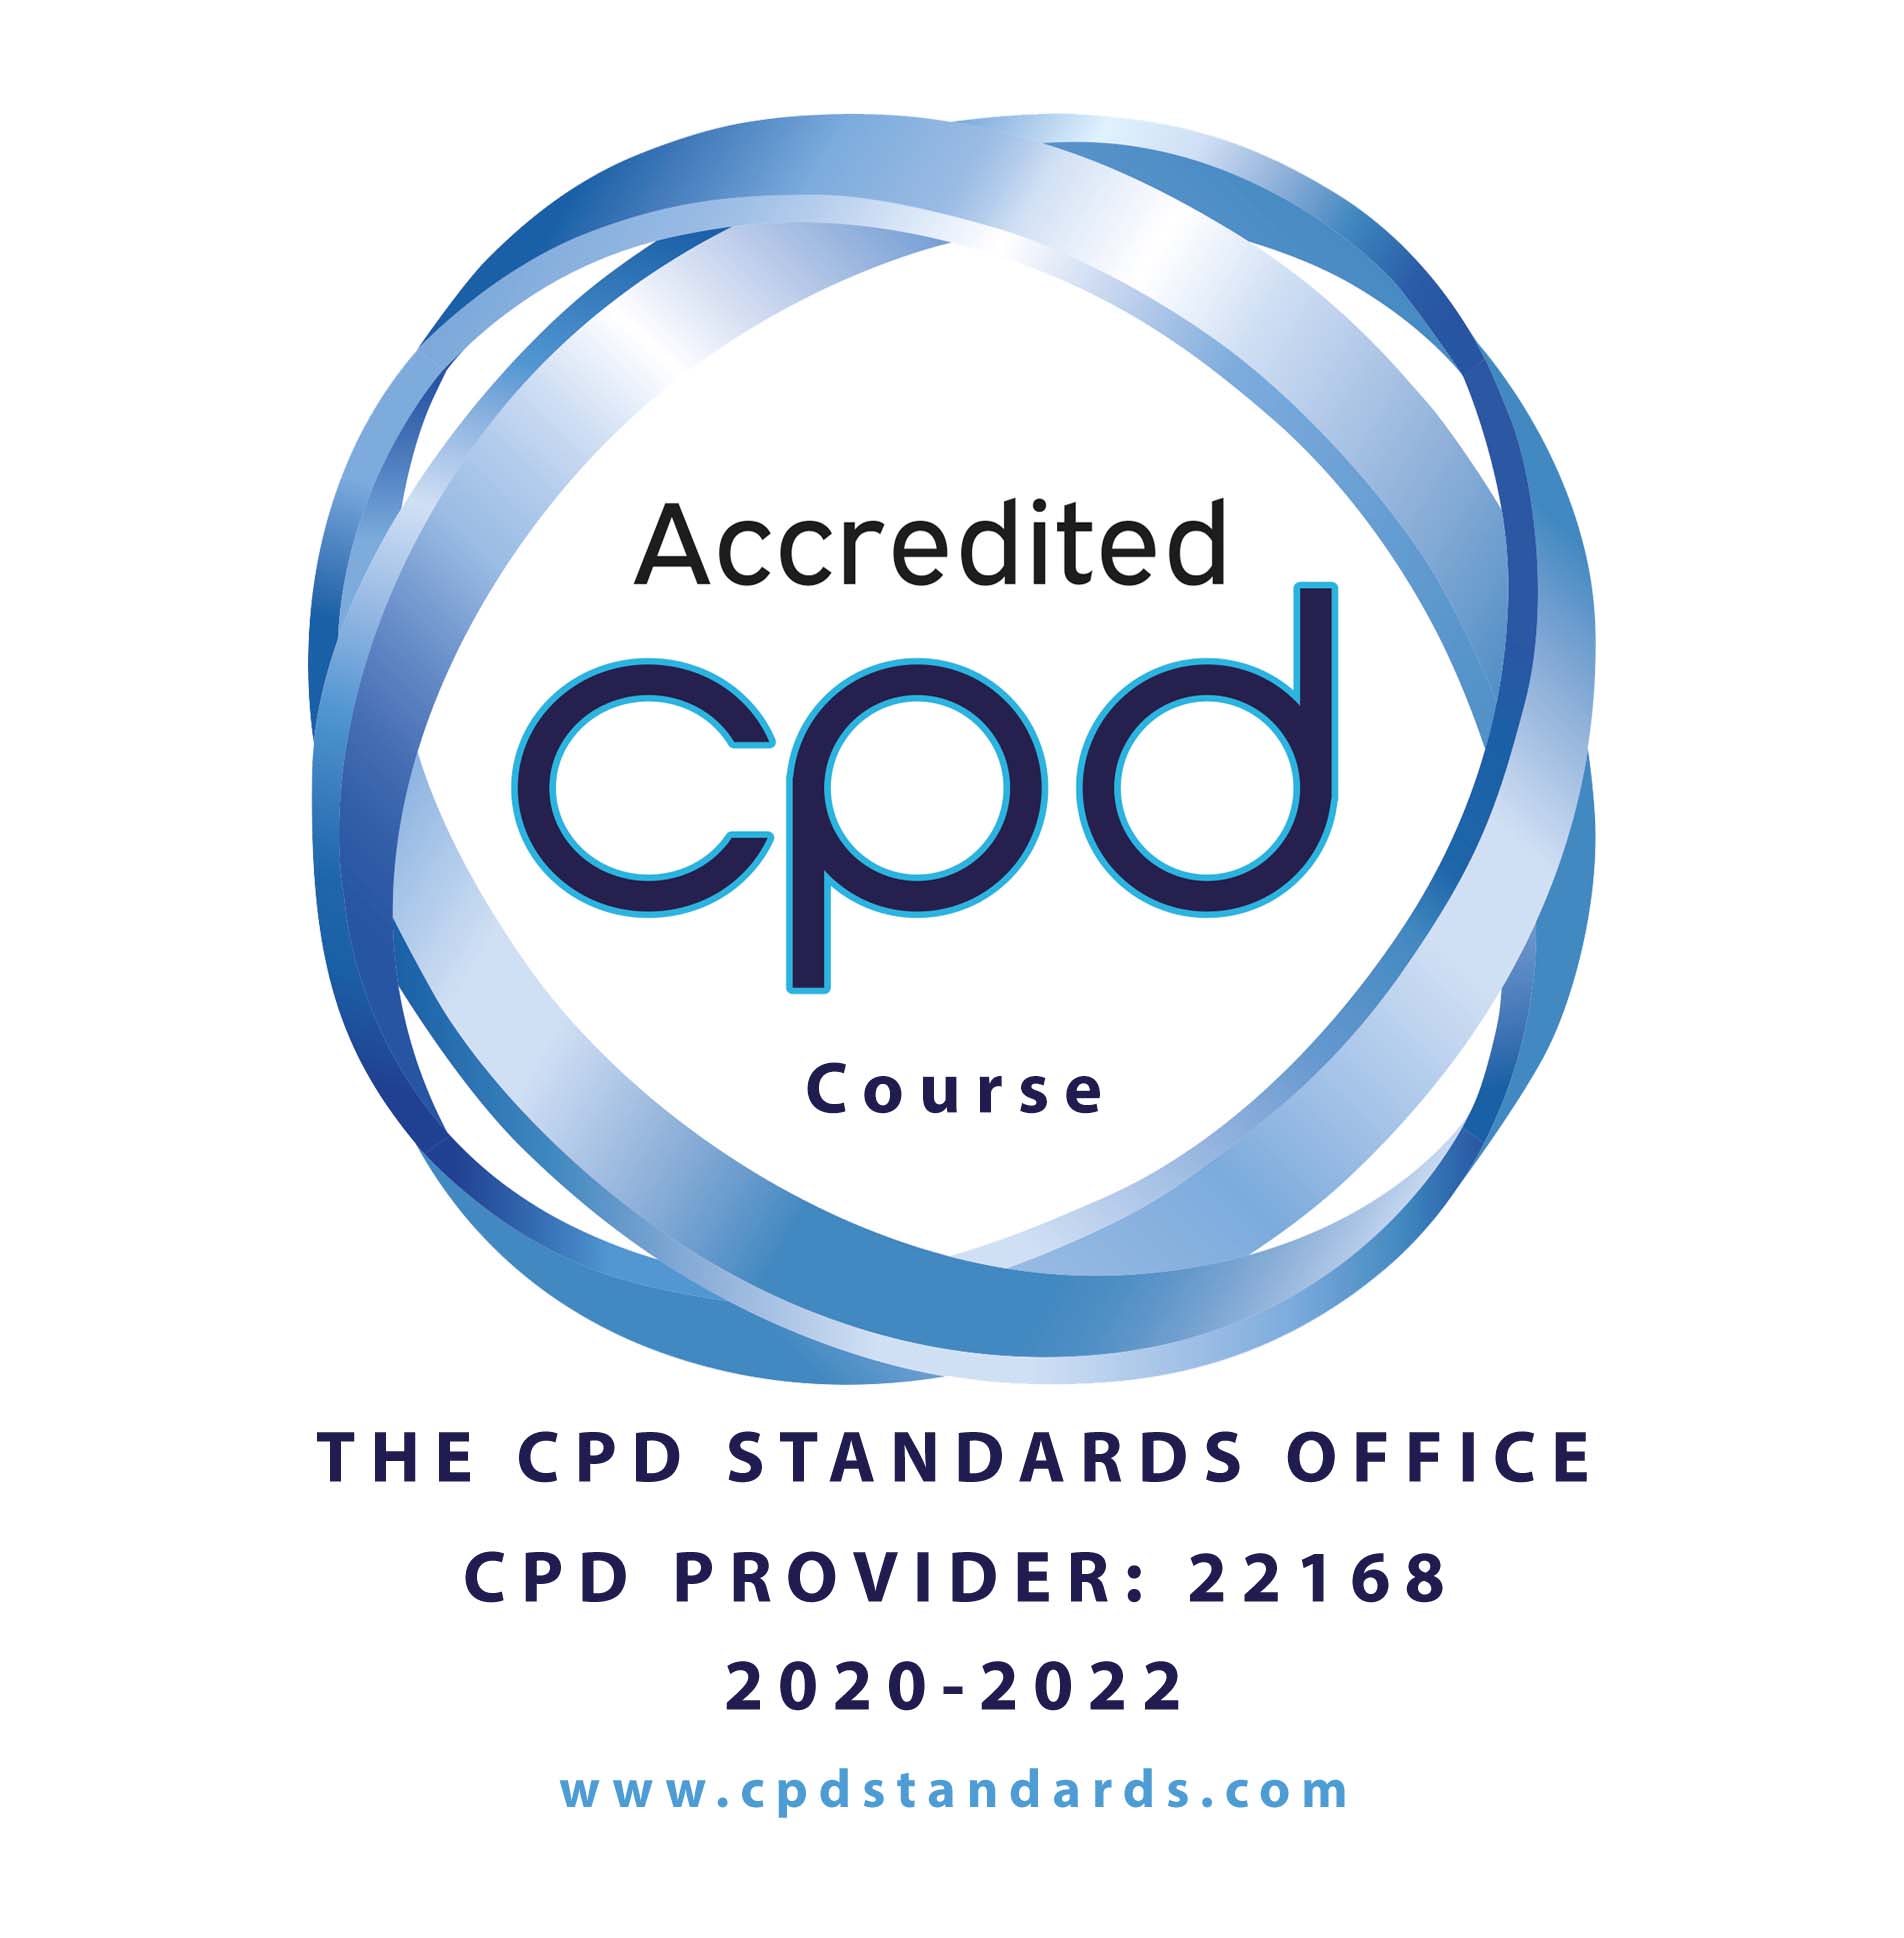 Accredited CPD Provider